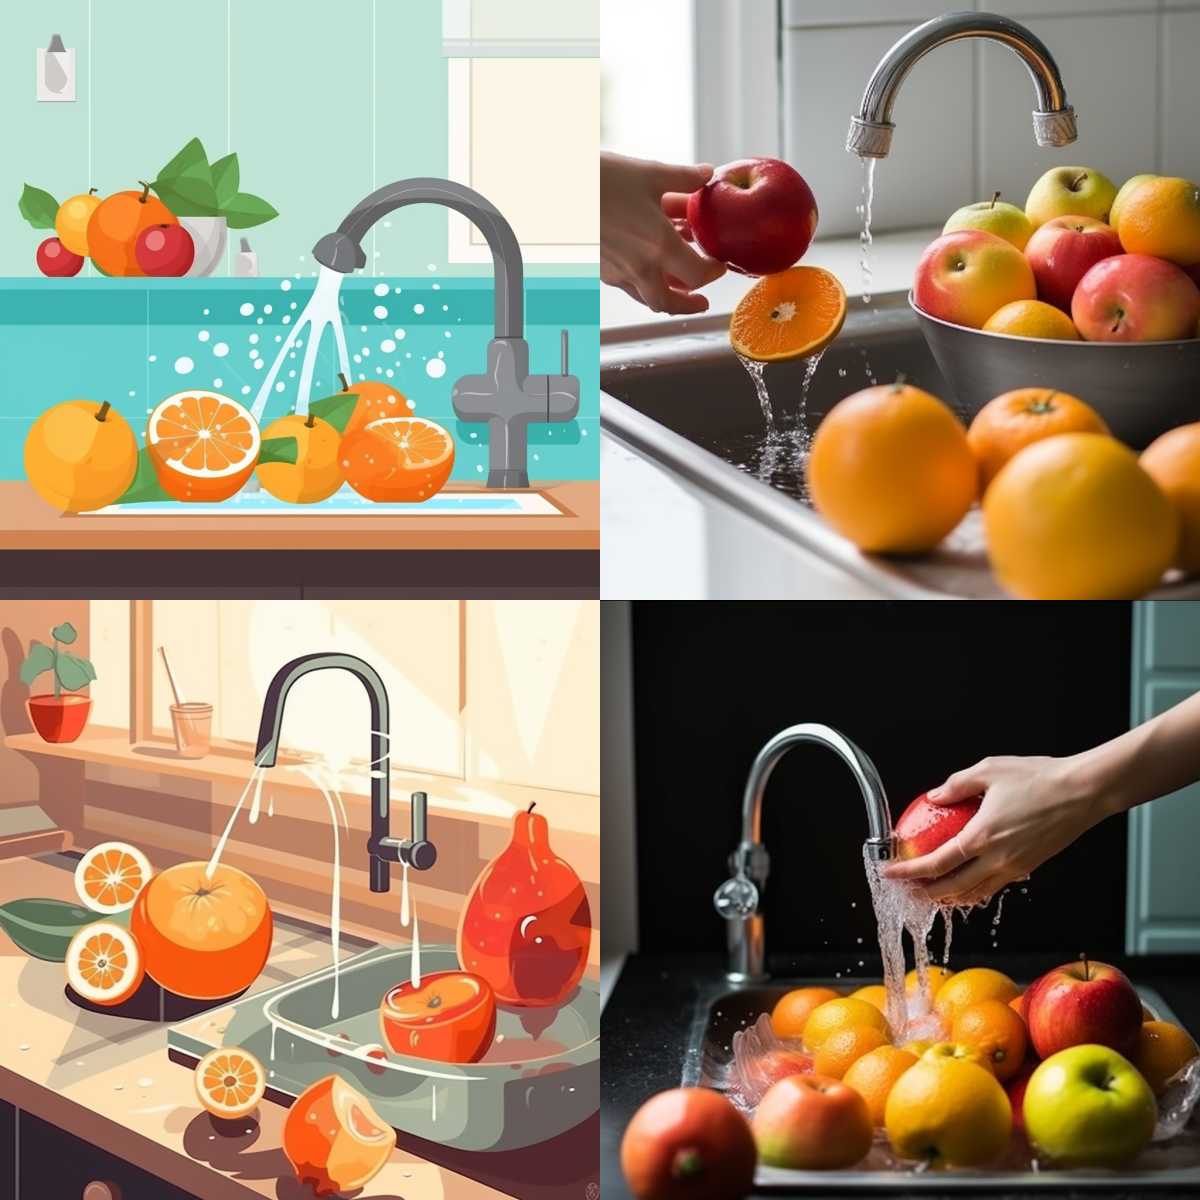 Senwater_washing_orange_American_kitchen_water_from_faucet_appl_d573fb95-168e-4d24-b242-70d4c433303f